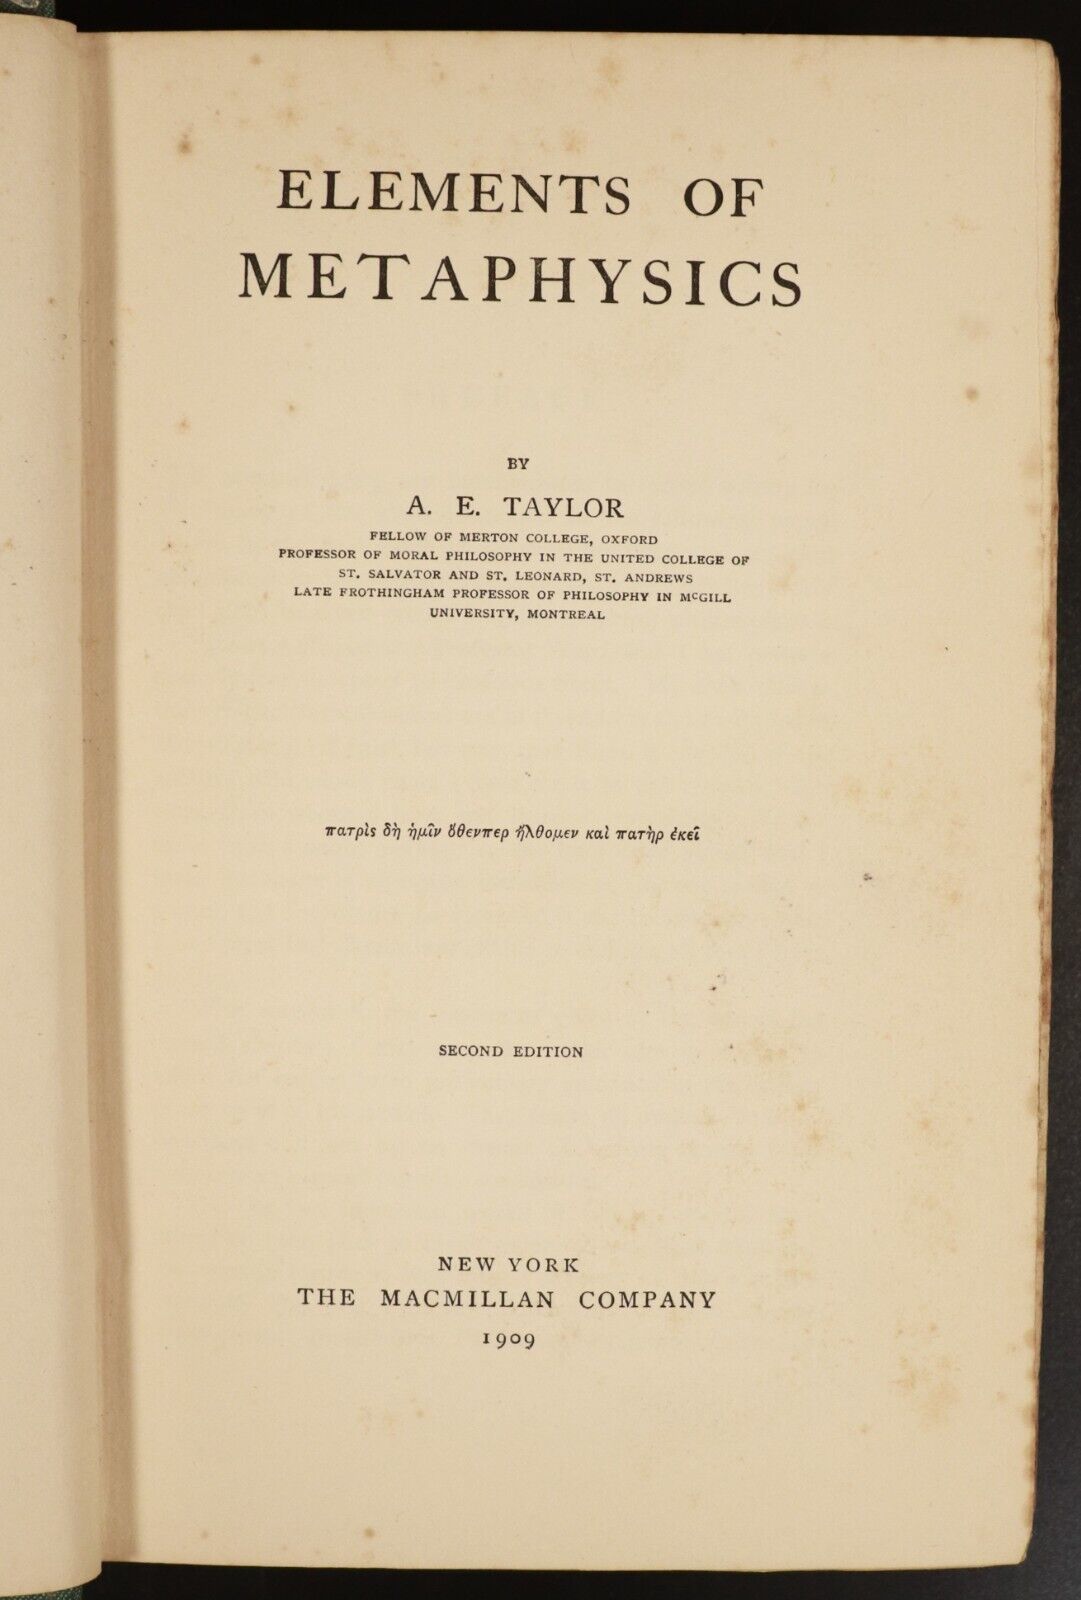 1909 Elements Of Metaphysics by AE Taylor 1st Edition Antique Philosophy Book